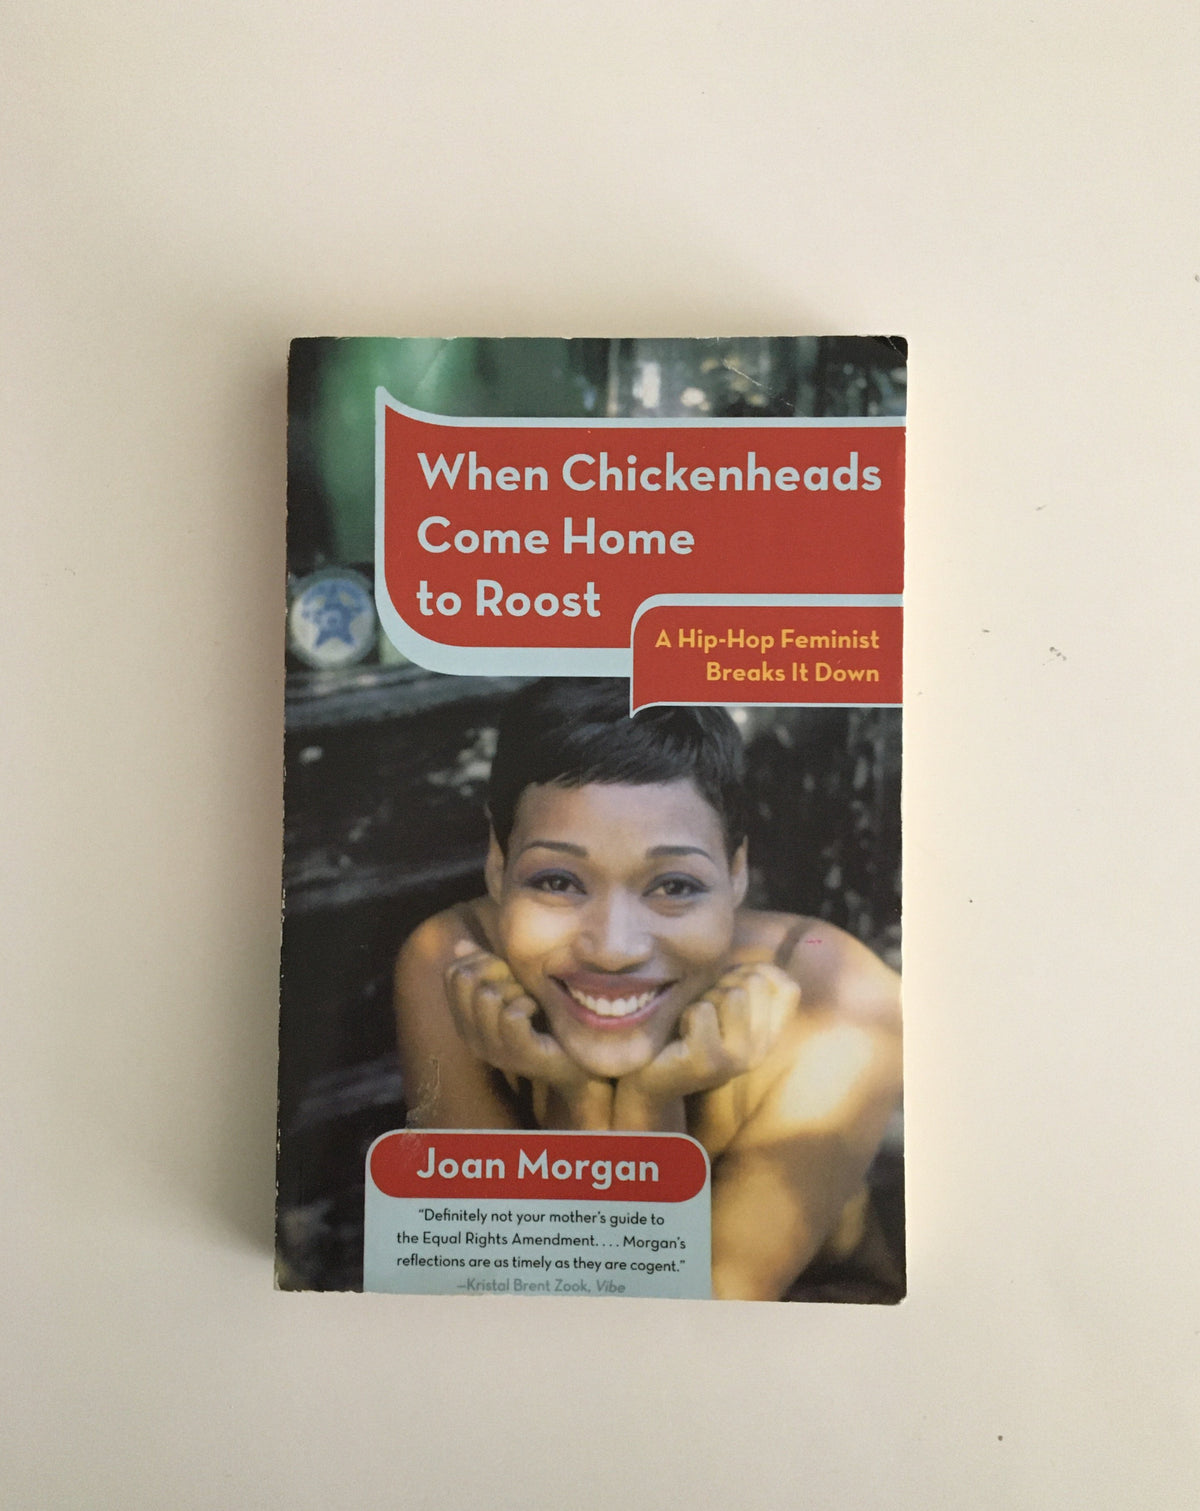 When Chickenheads Come Home to Roost by Joan Morgan, book, Ten Dollar Books, Ten Dollar Books